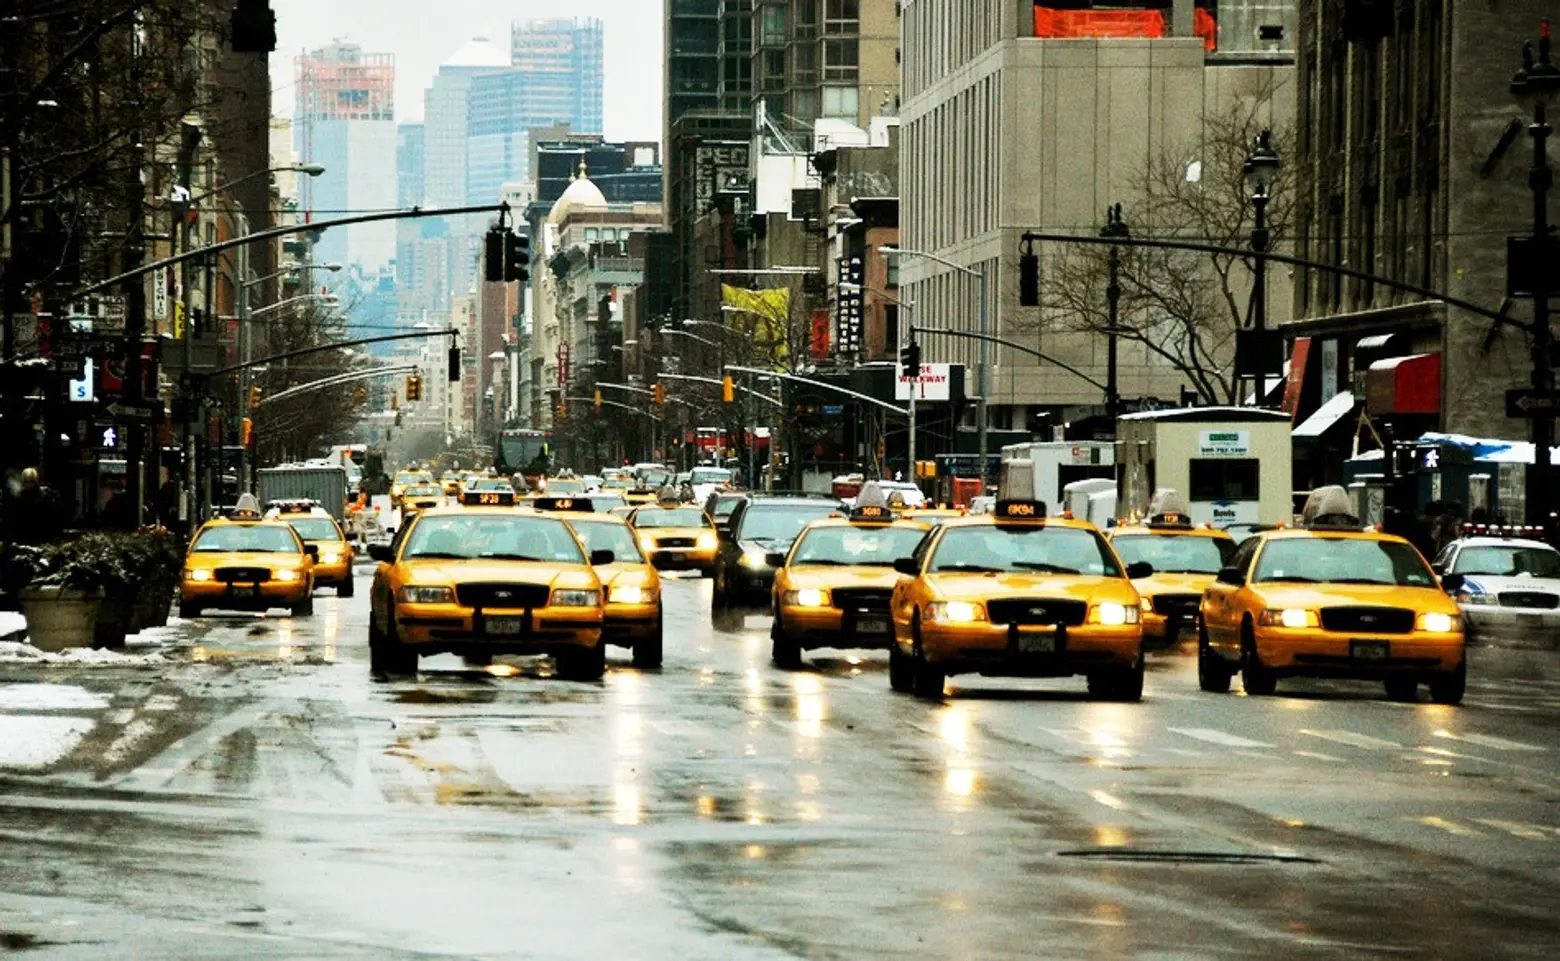 3,000 Ubers could replace NYC’s fleet of 14,000 taxis